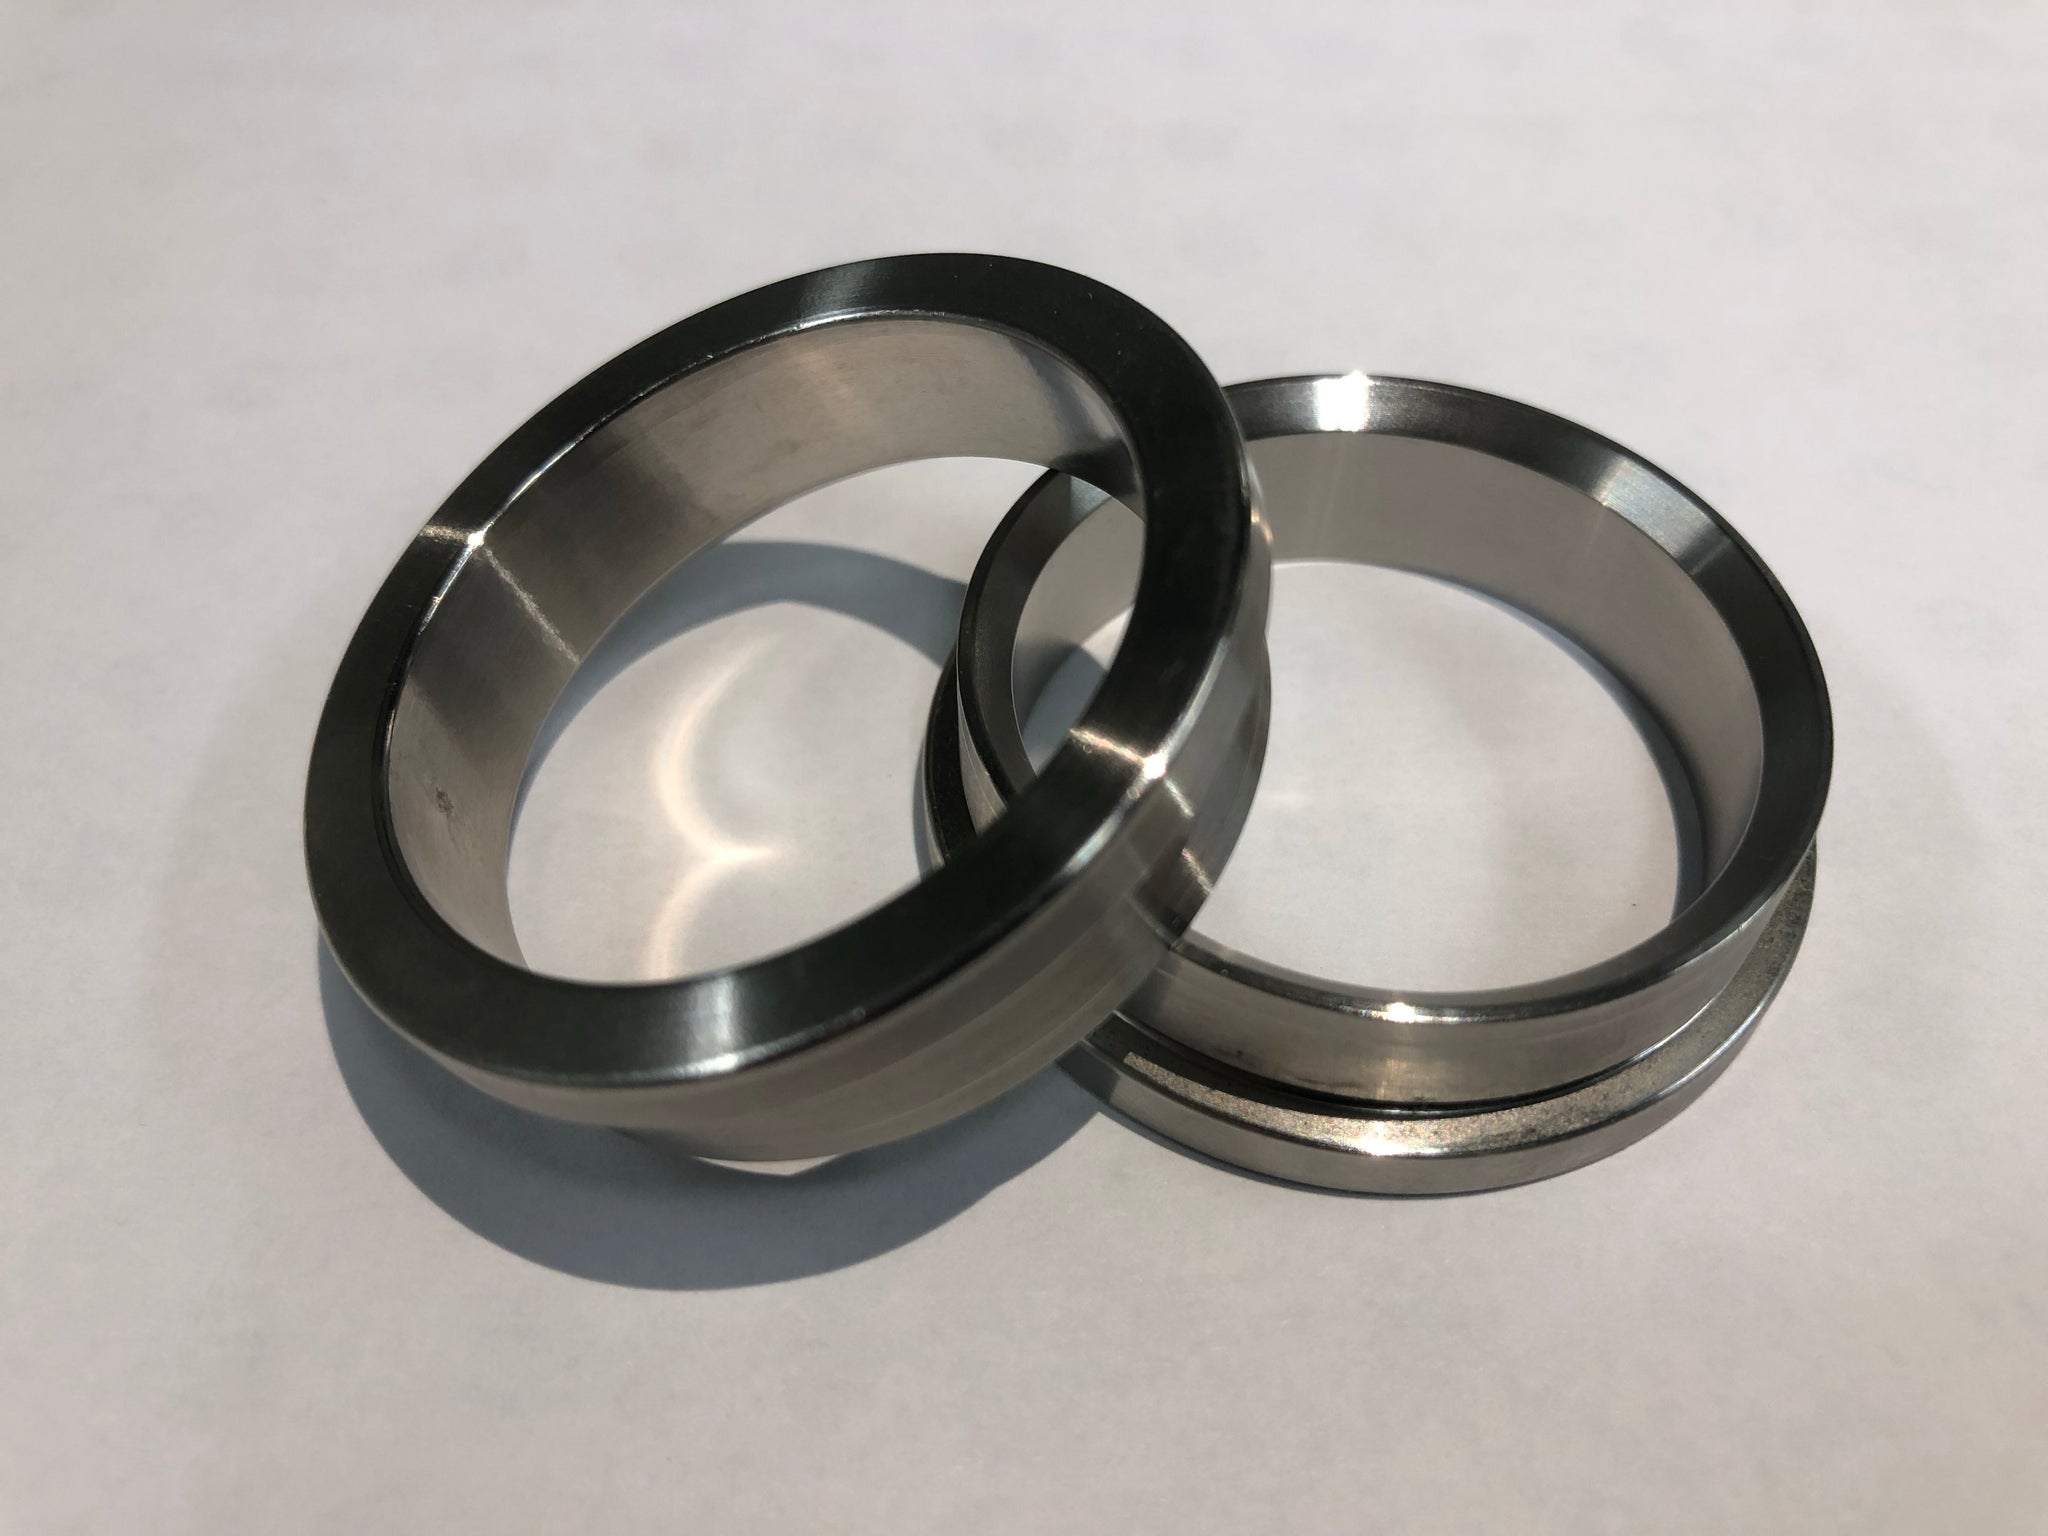 WOLAR STEEL GASKET RING BX 152 MUD SKID 6A-0333 : IRONTIME SALES INC.